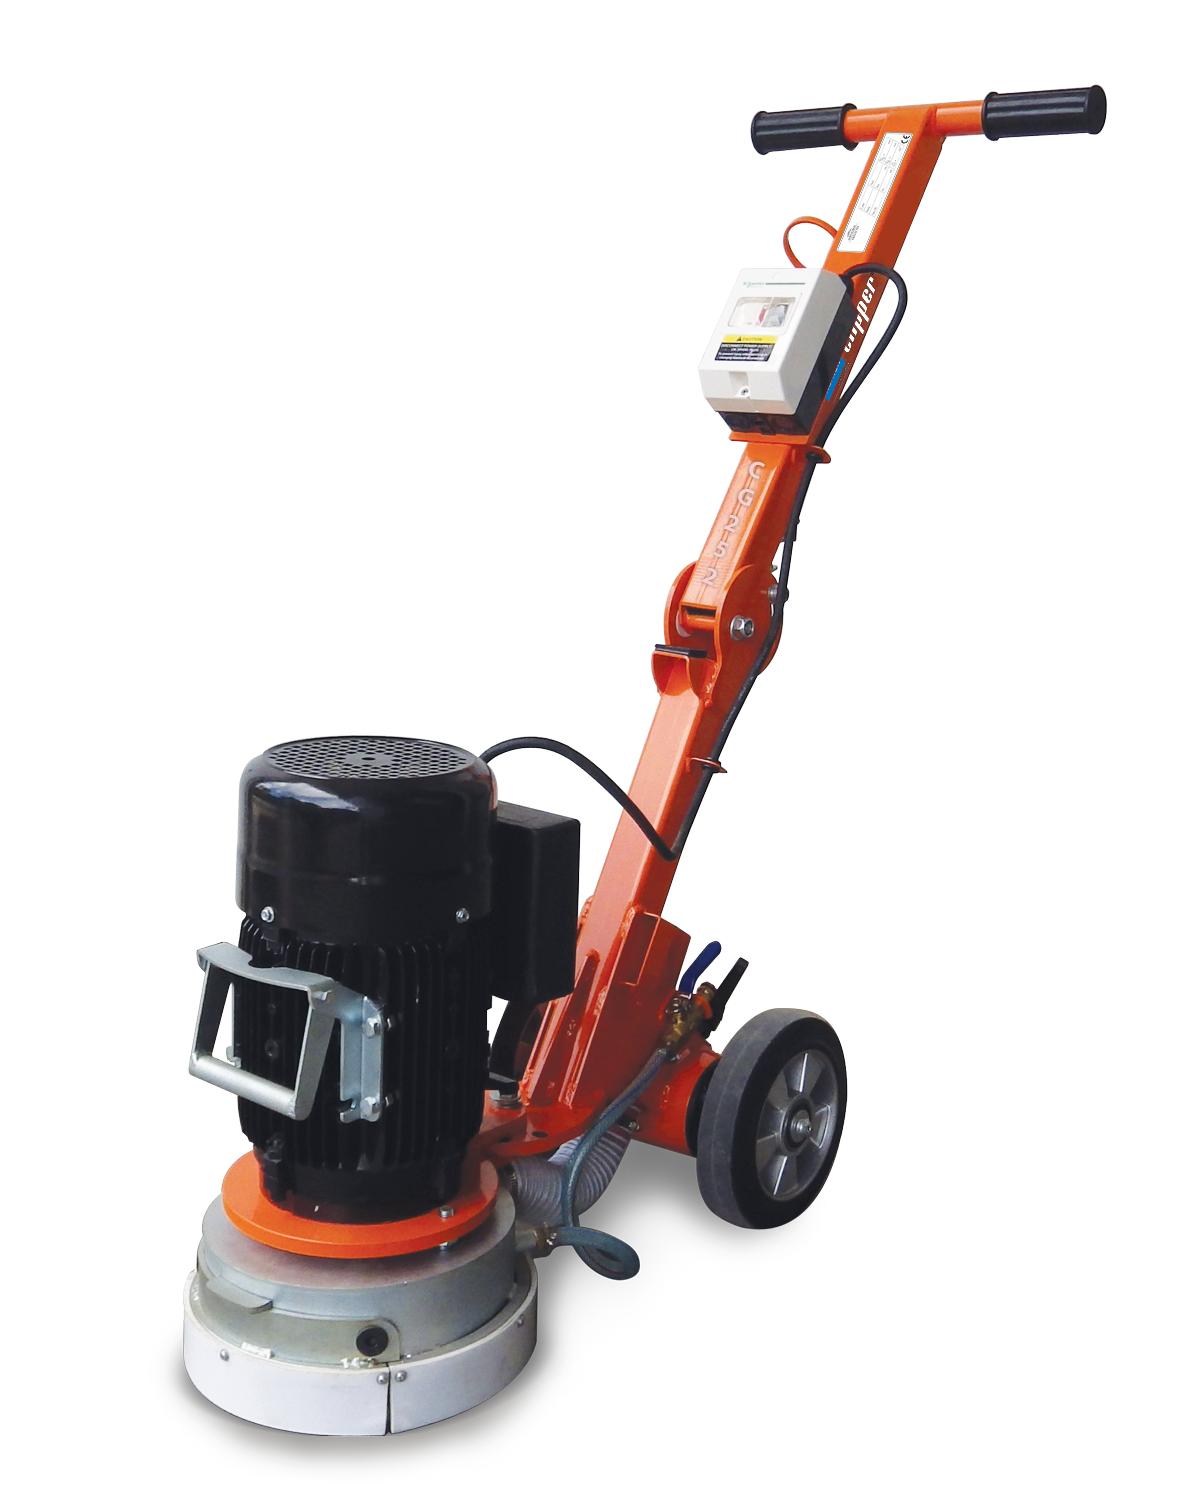 a hand truck with wheels and an electric motor